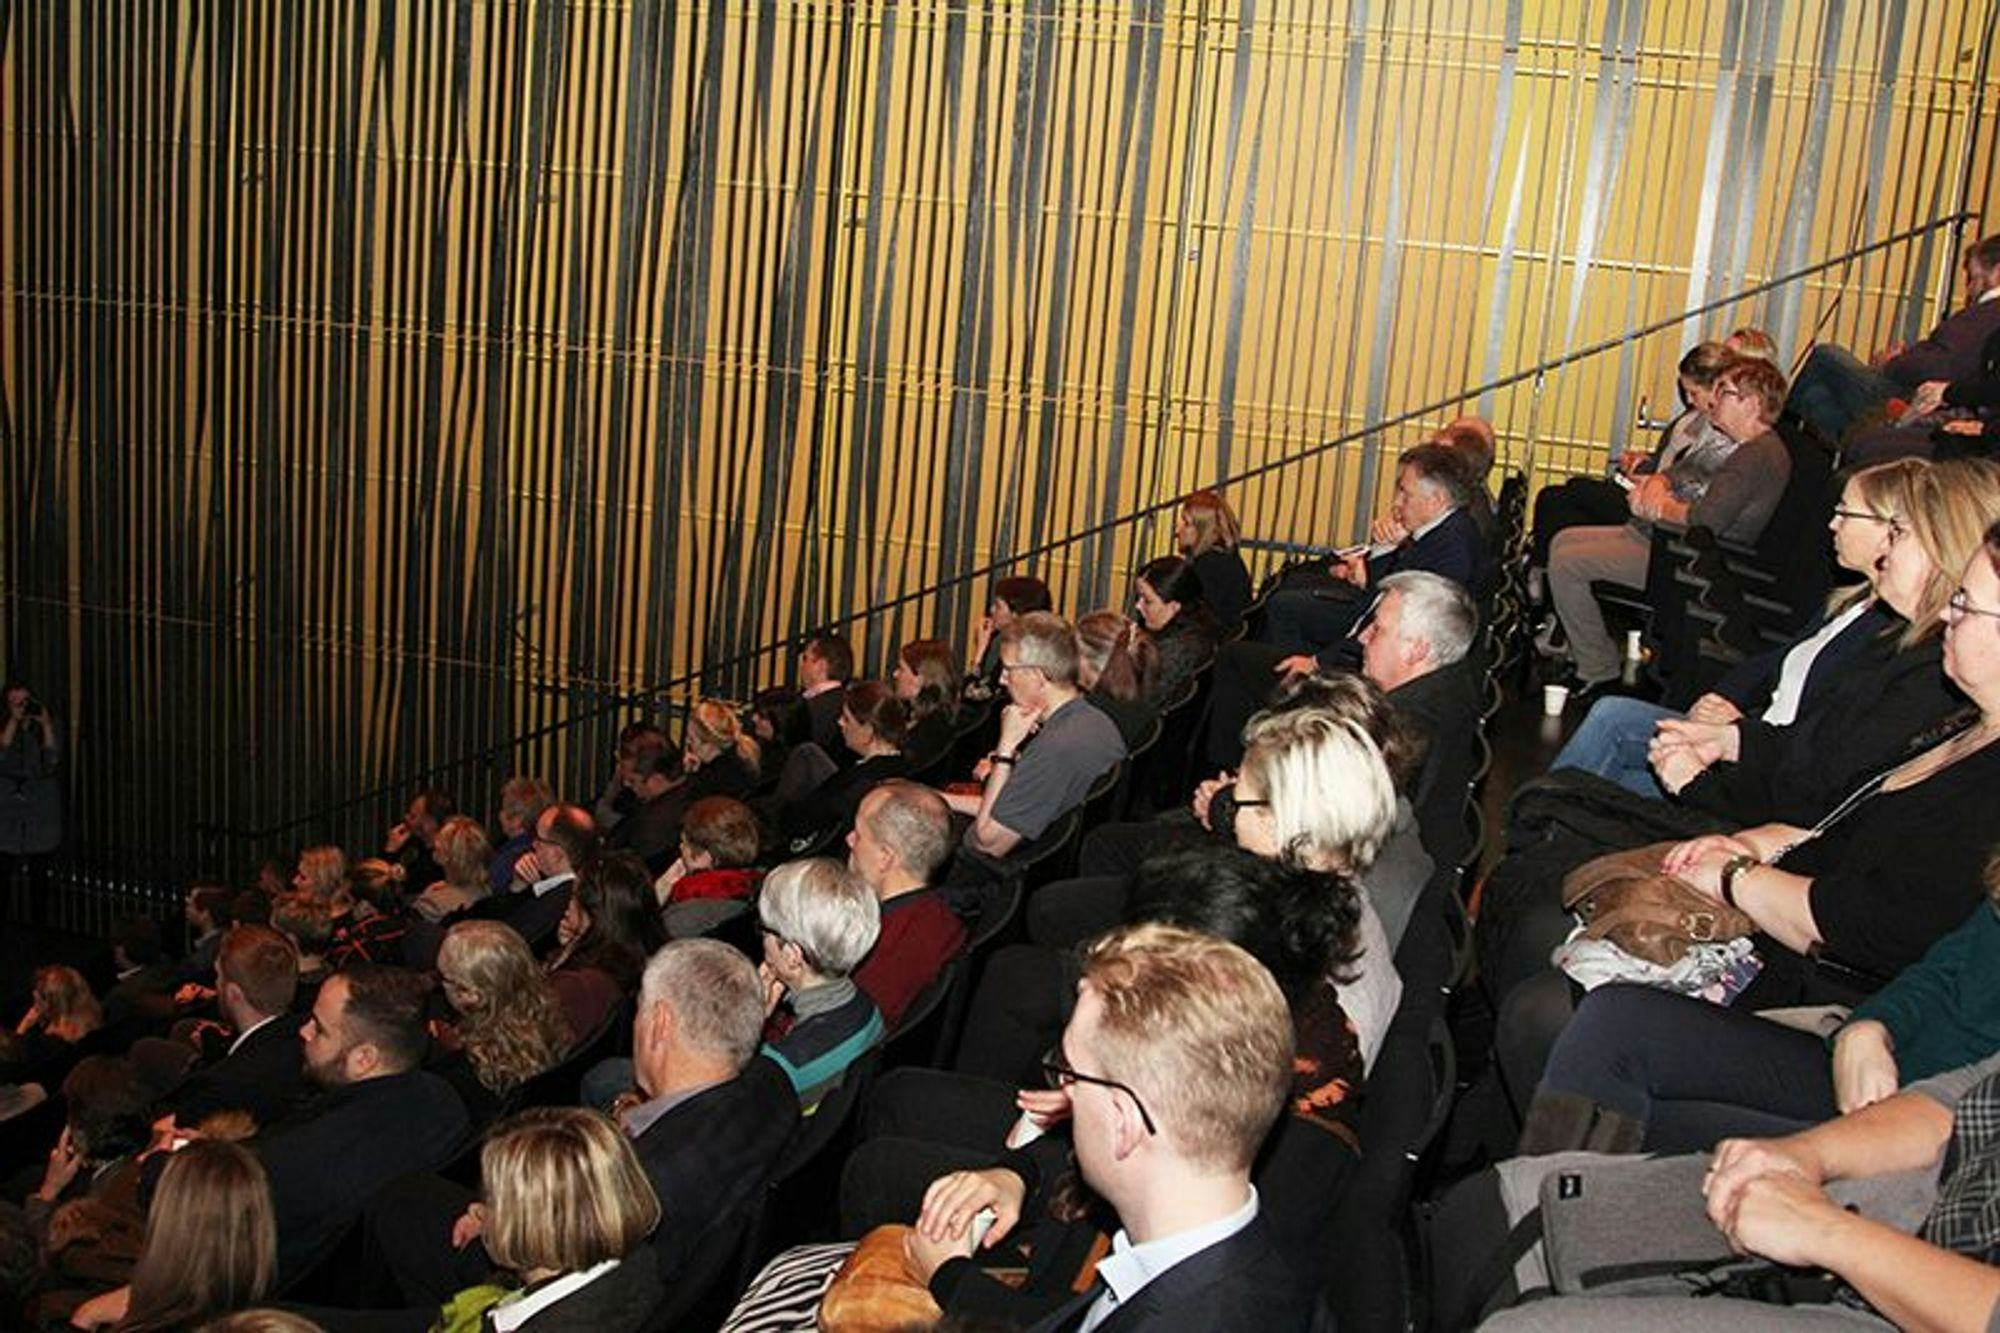  group of people seated in an auditorium 